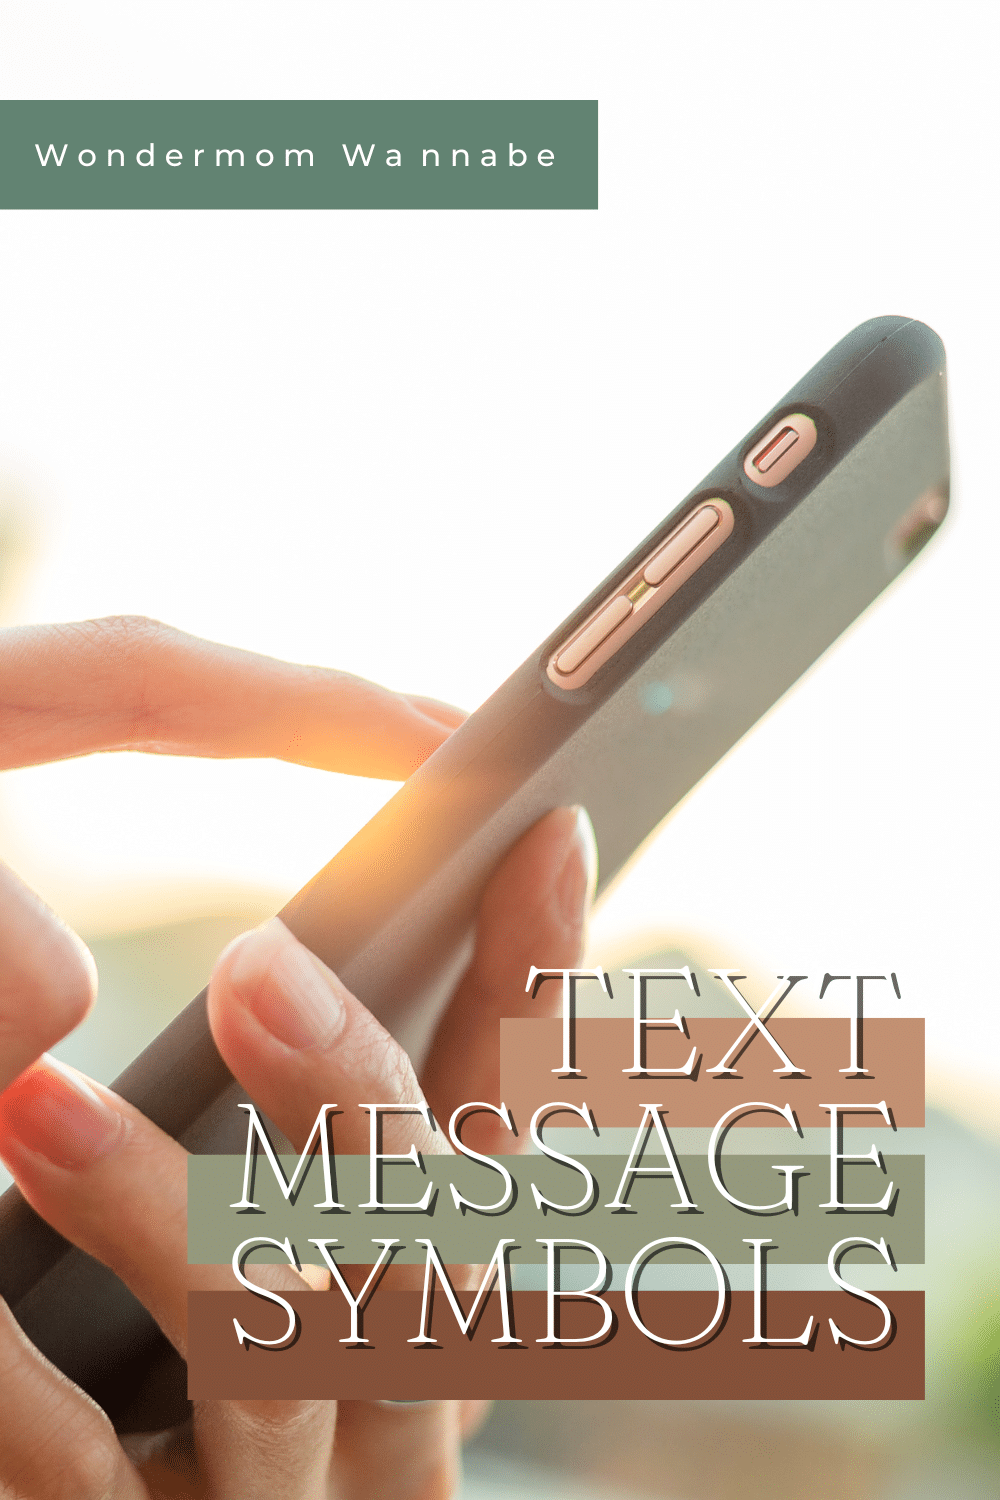 This parent's guide to text message symbols is a virtual dictionary of text message abbreviations and emojis. Finally, I can decipher the messages from my kids! #parenting #textmessaging #cellphones #textmessagesymbols via @wondermomwannab